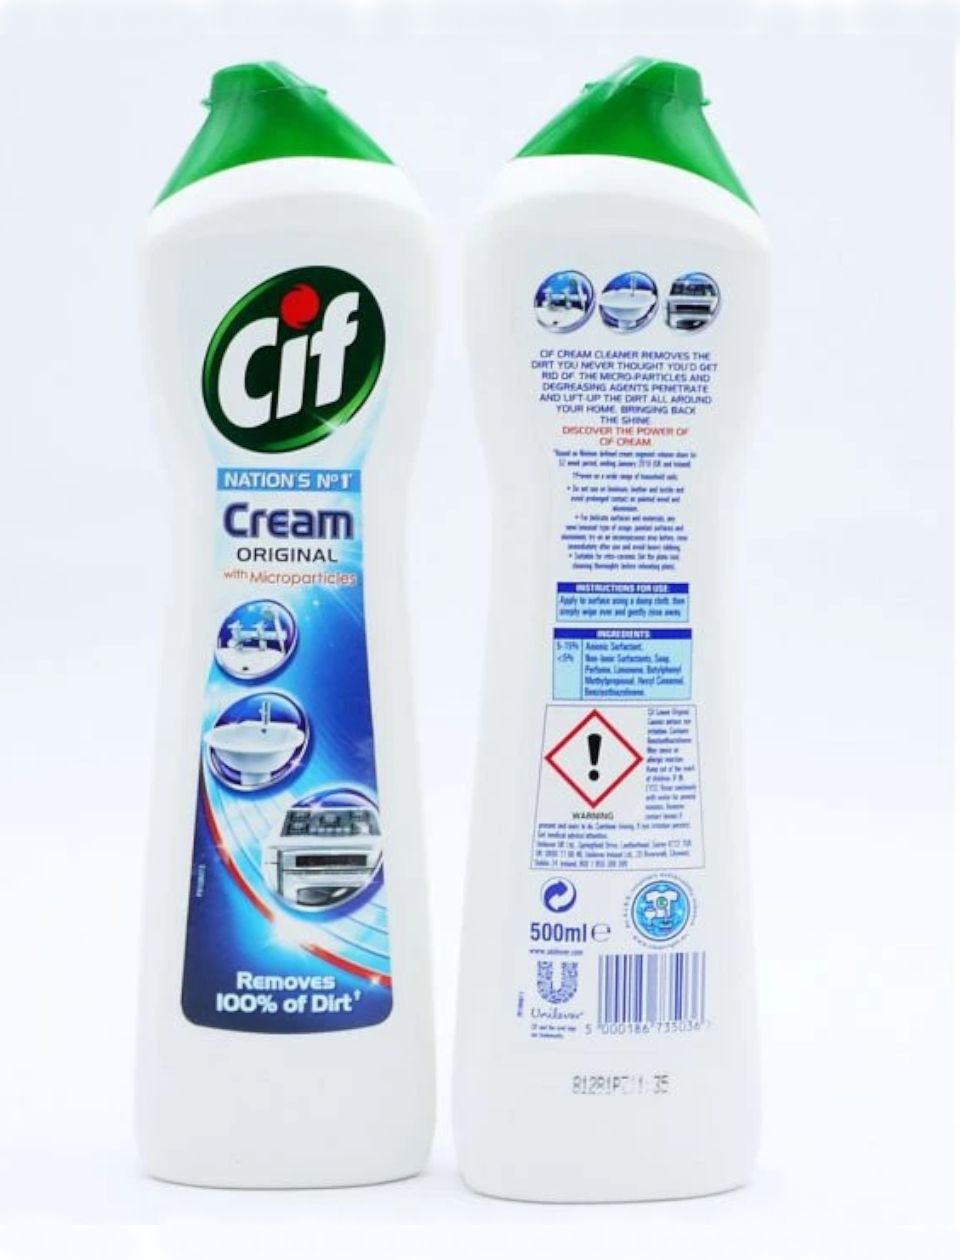 https://www.safetysuppliesdirect.co.uk/image/cache/catalog/Janitorial/2021/CIF%20Cream%20Cleaner-960x1260.jpg